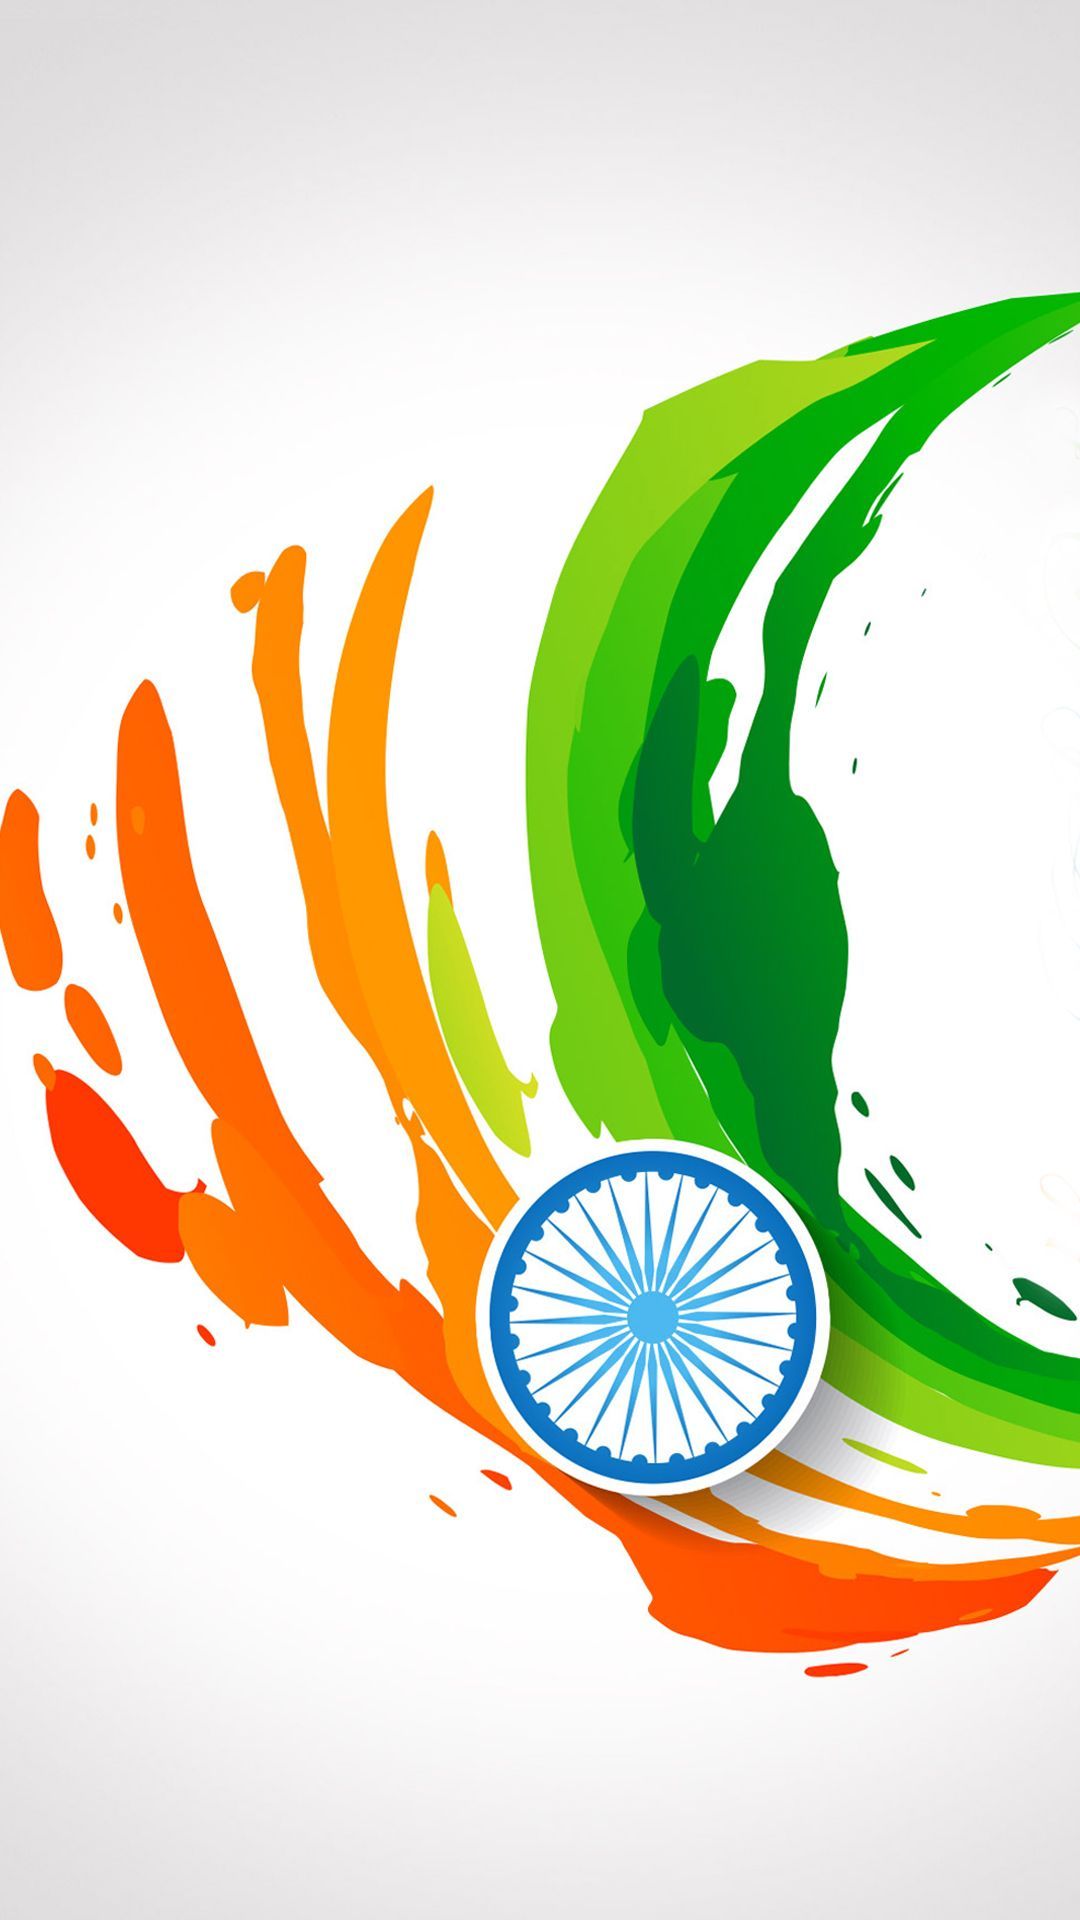 ✓[65+] India Flag for Mobile Phone Wallpaper 14 of 17 – Abstract Tricolour  - Android / iPhone HD Wallpaper Background Download (png / jpg) (2023)